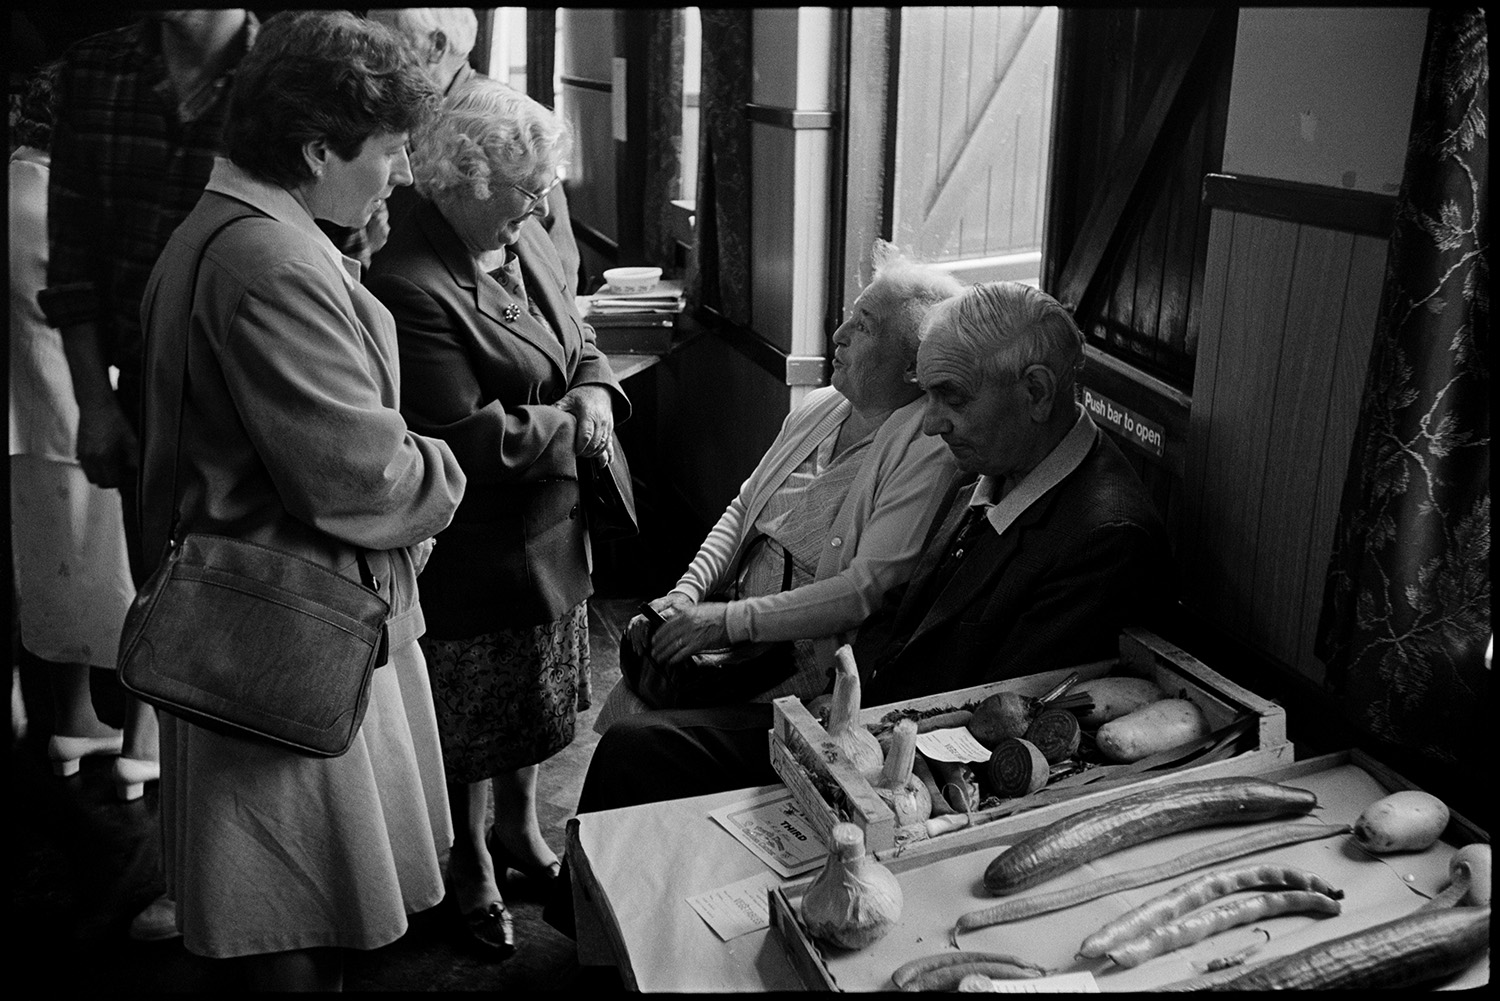 Flower show, displays of roses, cakes, vegetables, skittle alley.
[Four people talking by an open doorway at Dolton Flower Show in the village hall. Two trays of various vegetables are on display, including potatoes and broad beans.]